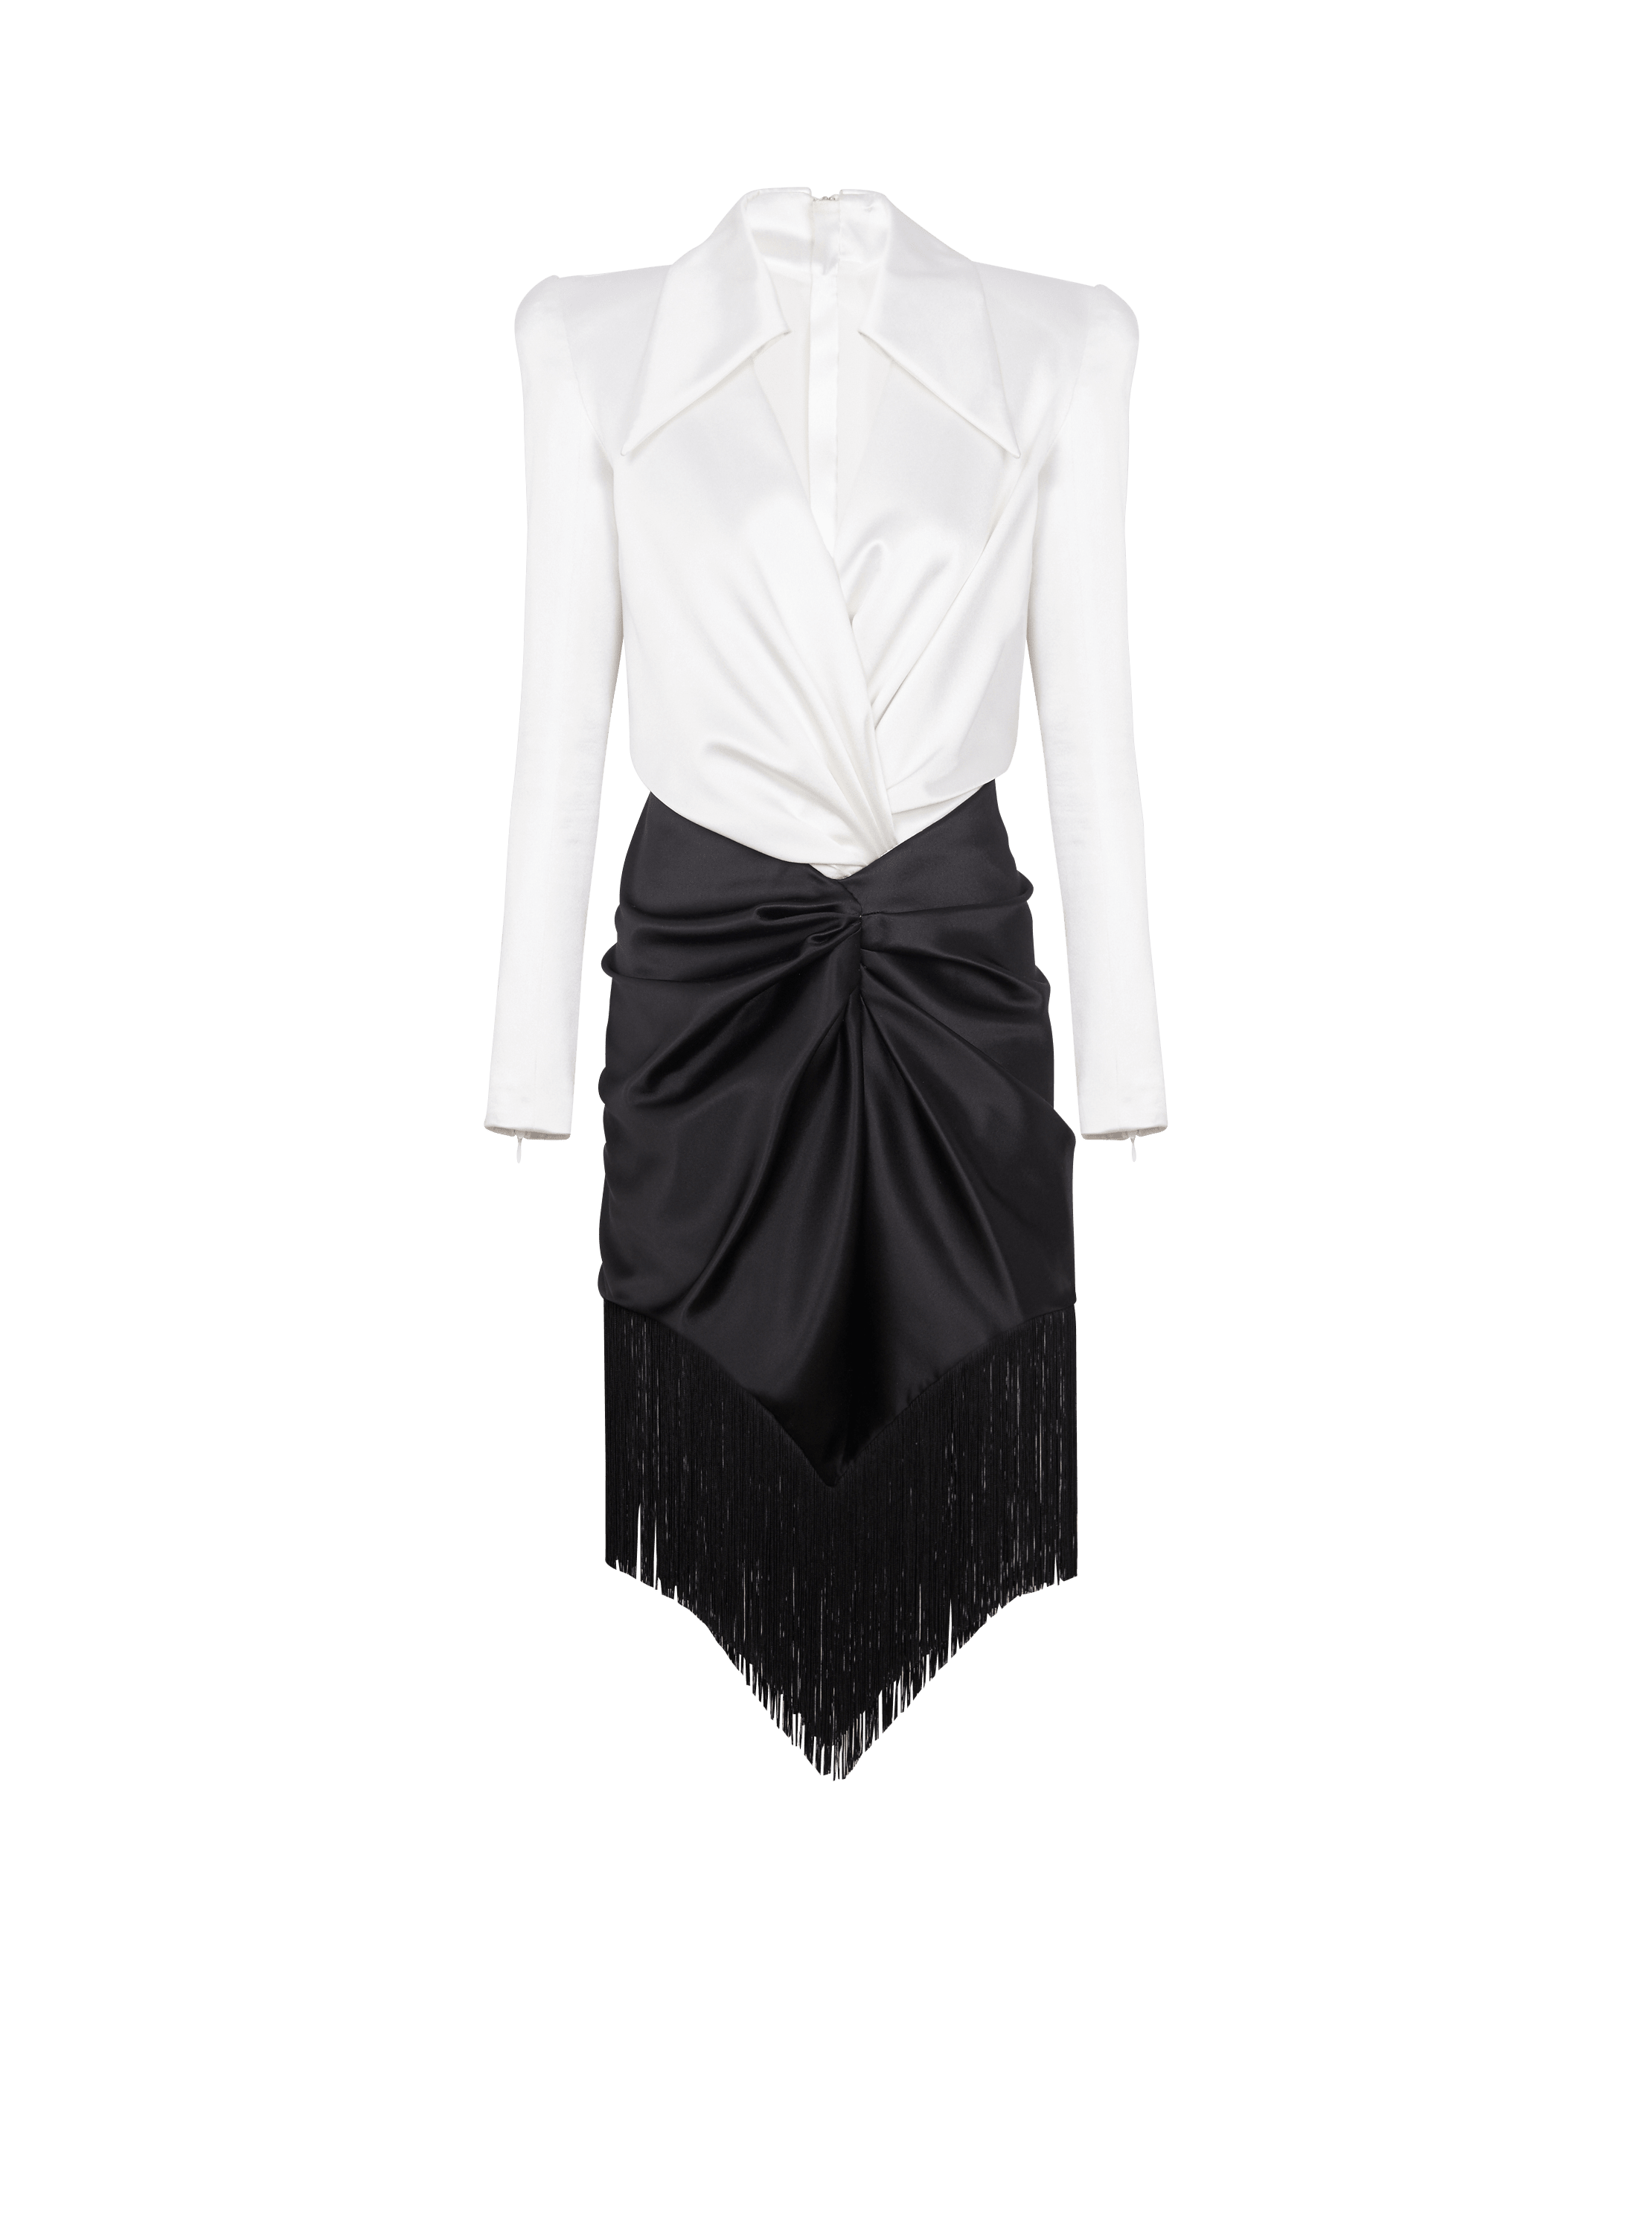 Draped and fringed satin tailored dress